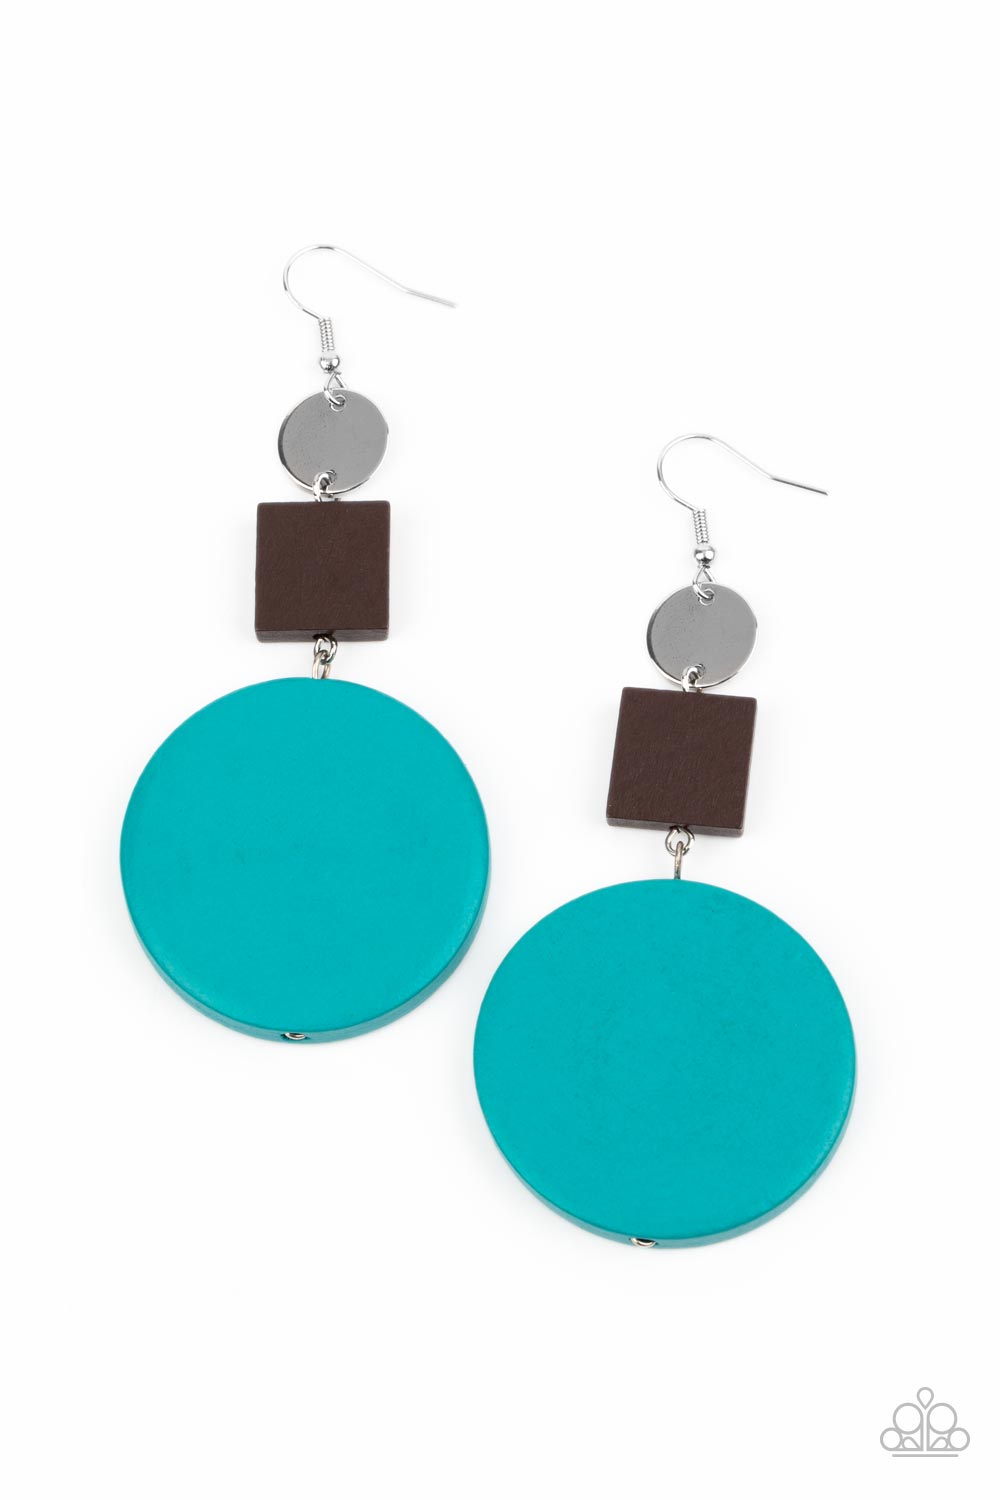 Paparazzi Accessories Modern Materials - Blue Earrings - Lady T Accessories